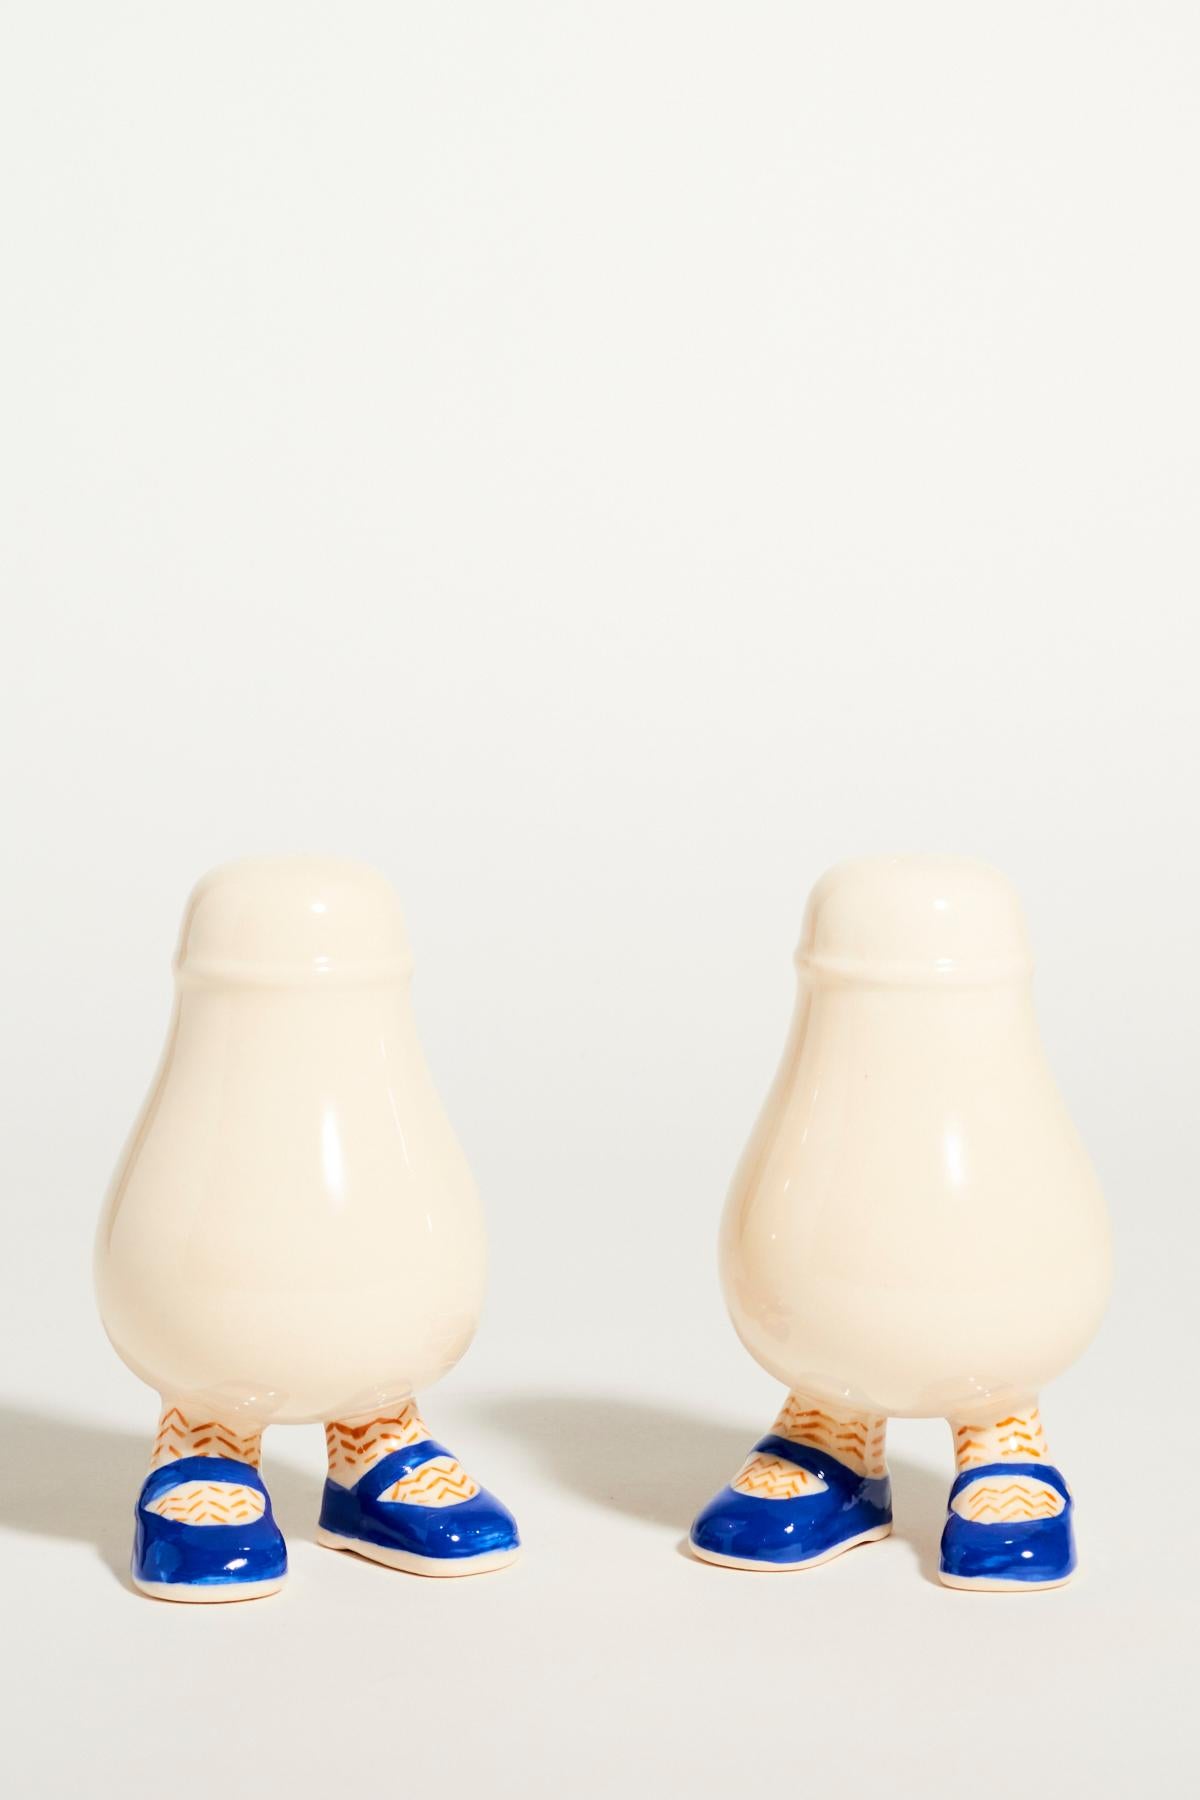 English novelty salt and pepper shakers with blue Mary Jane shoes.